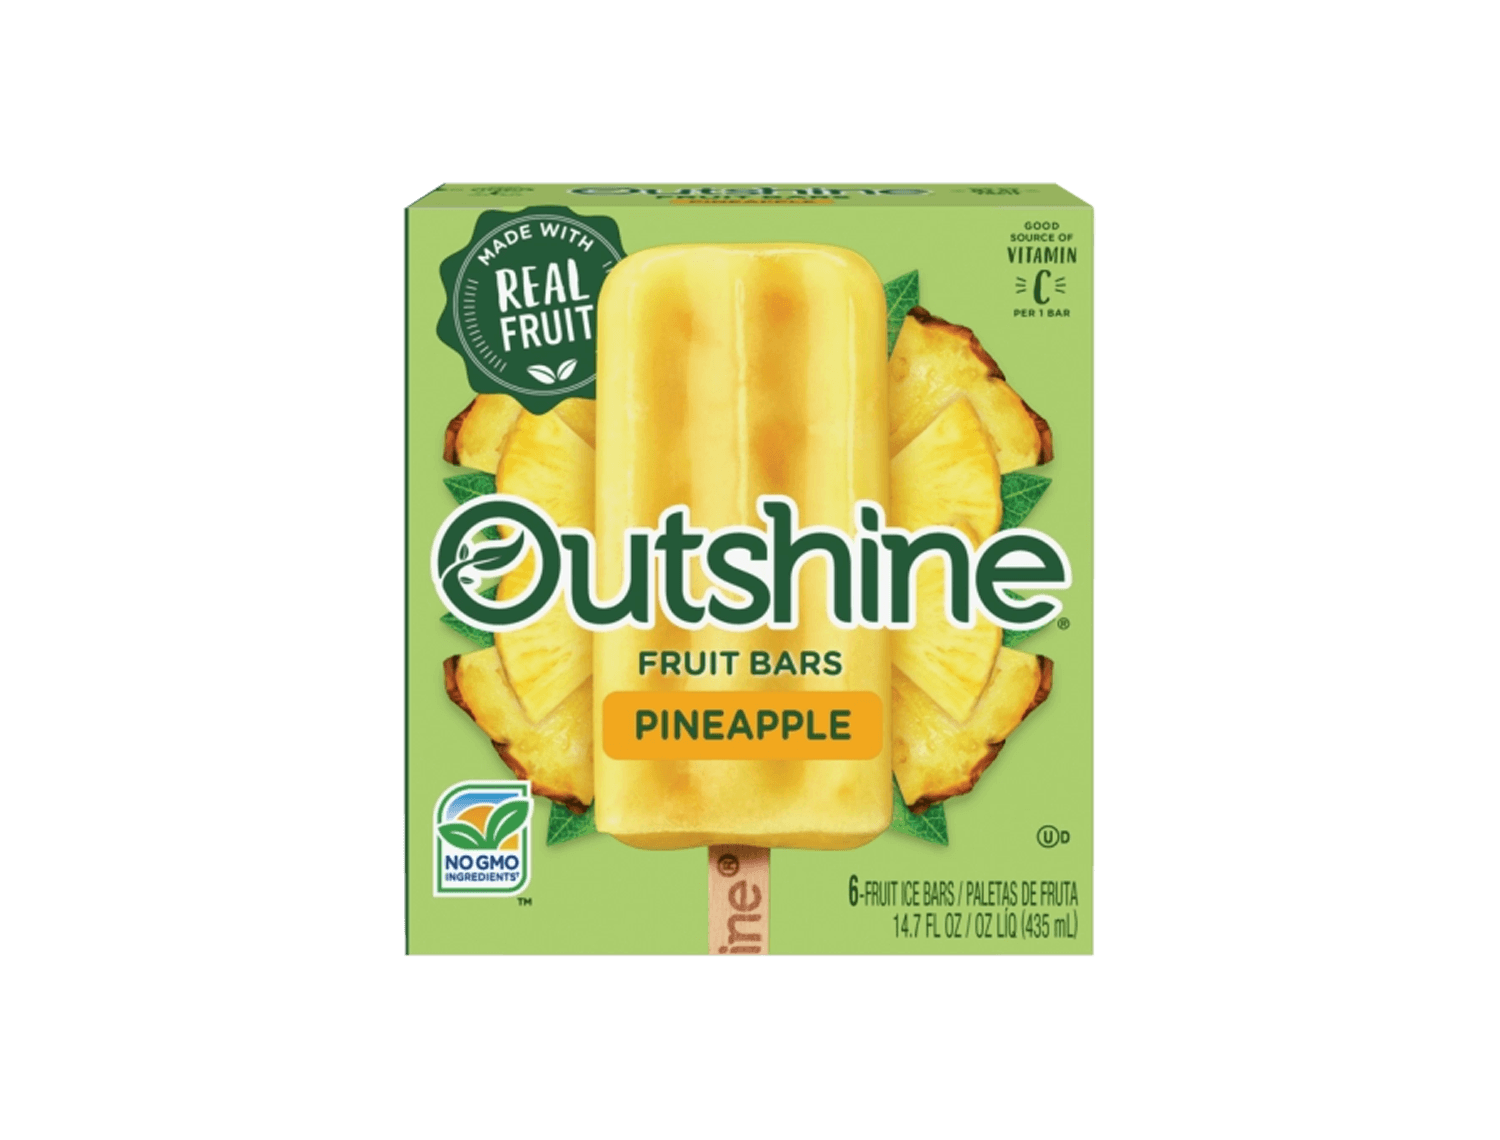 http://www.icecream.com/content/dam/dreyersgrandicecreaminc/us/en/outshine/products/product-pages/Outshine-Pineapple-Fruit-Bars.png